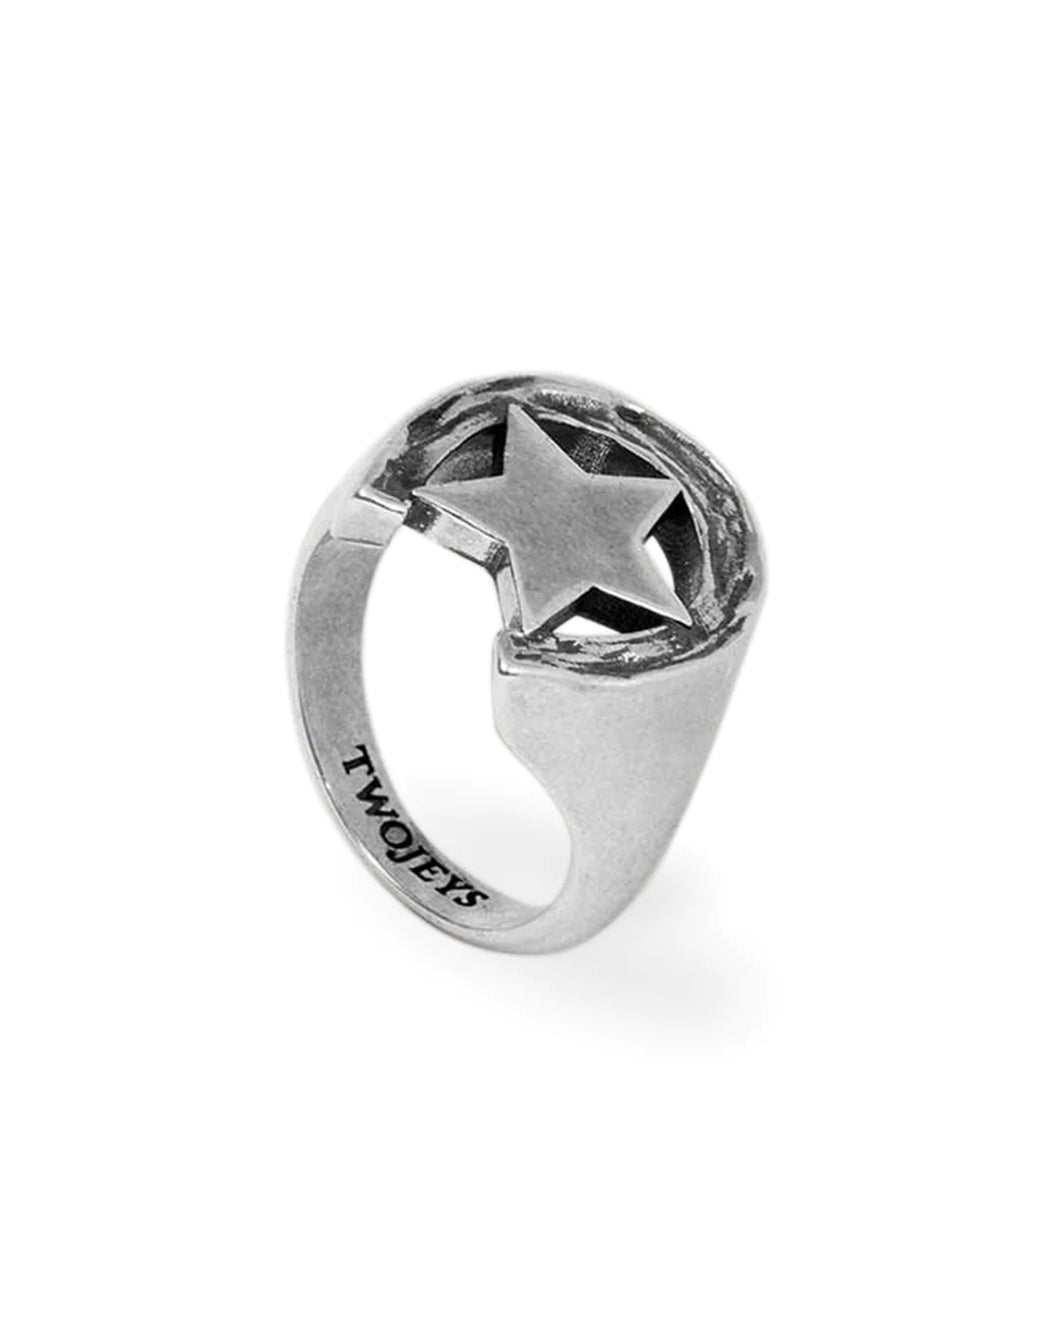 TWO JEYS STAR RING